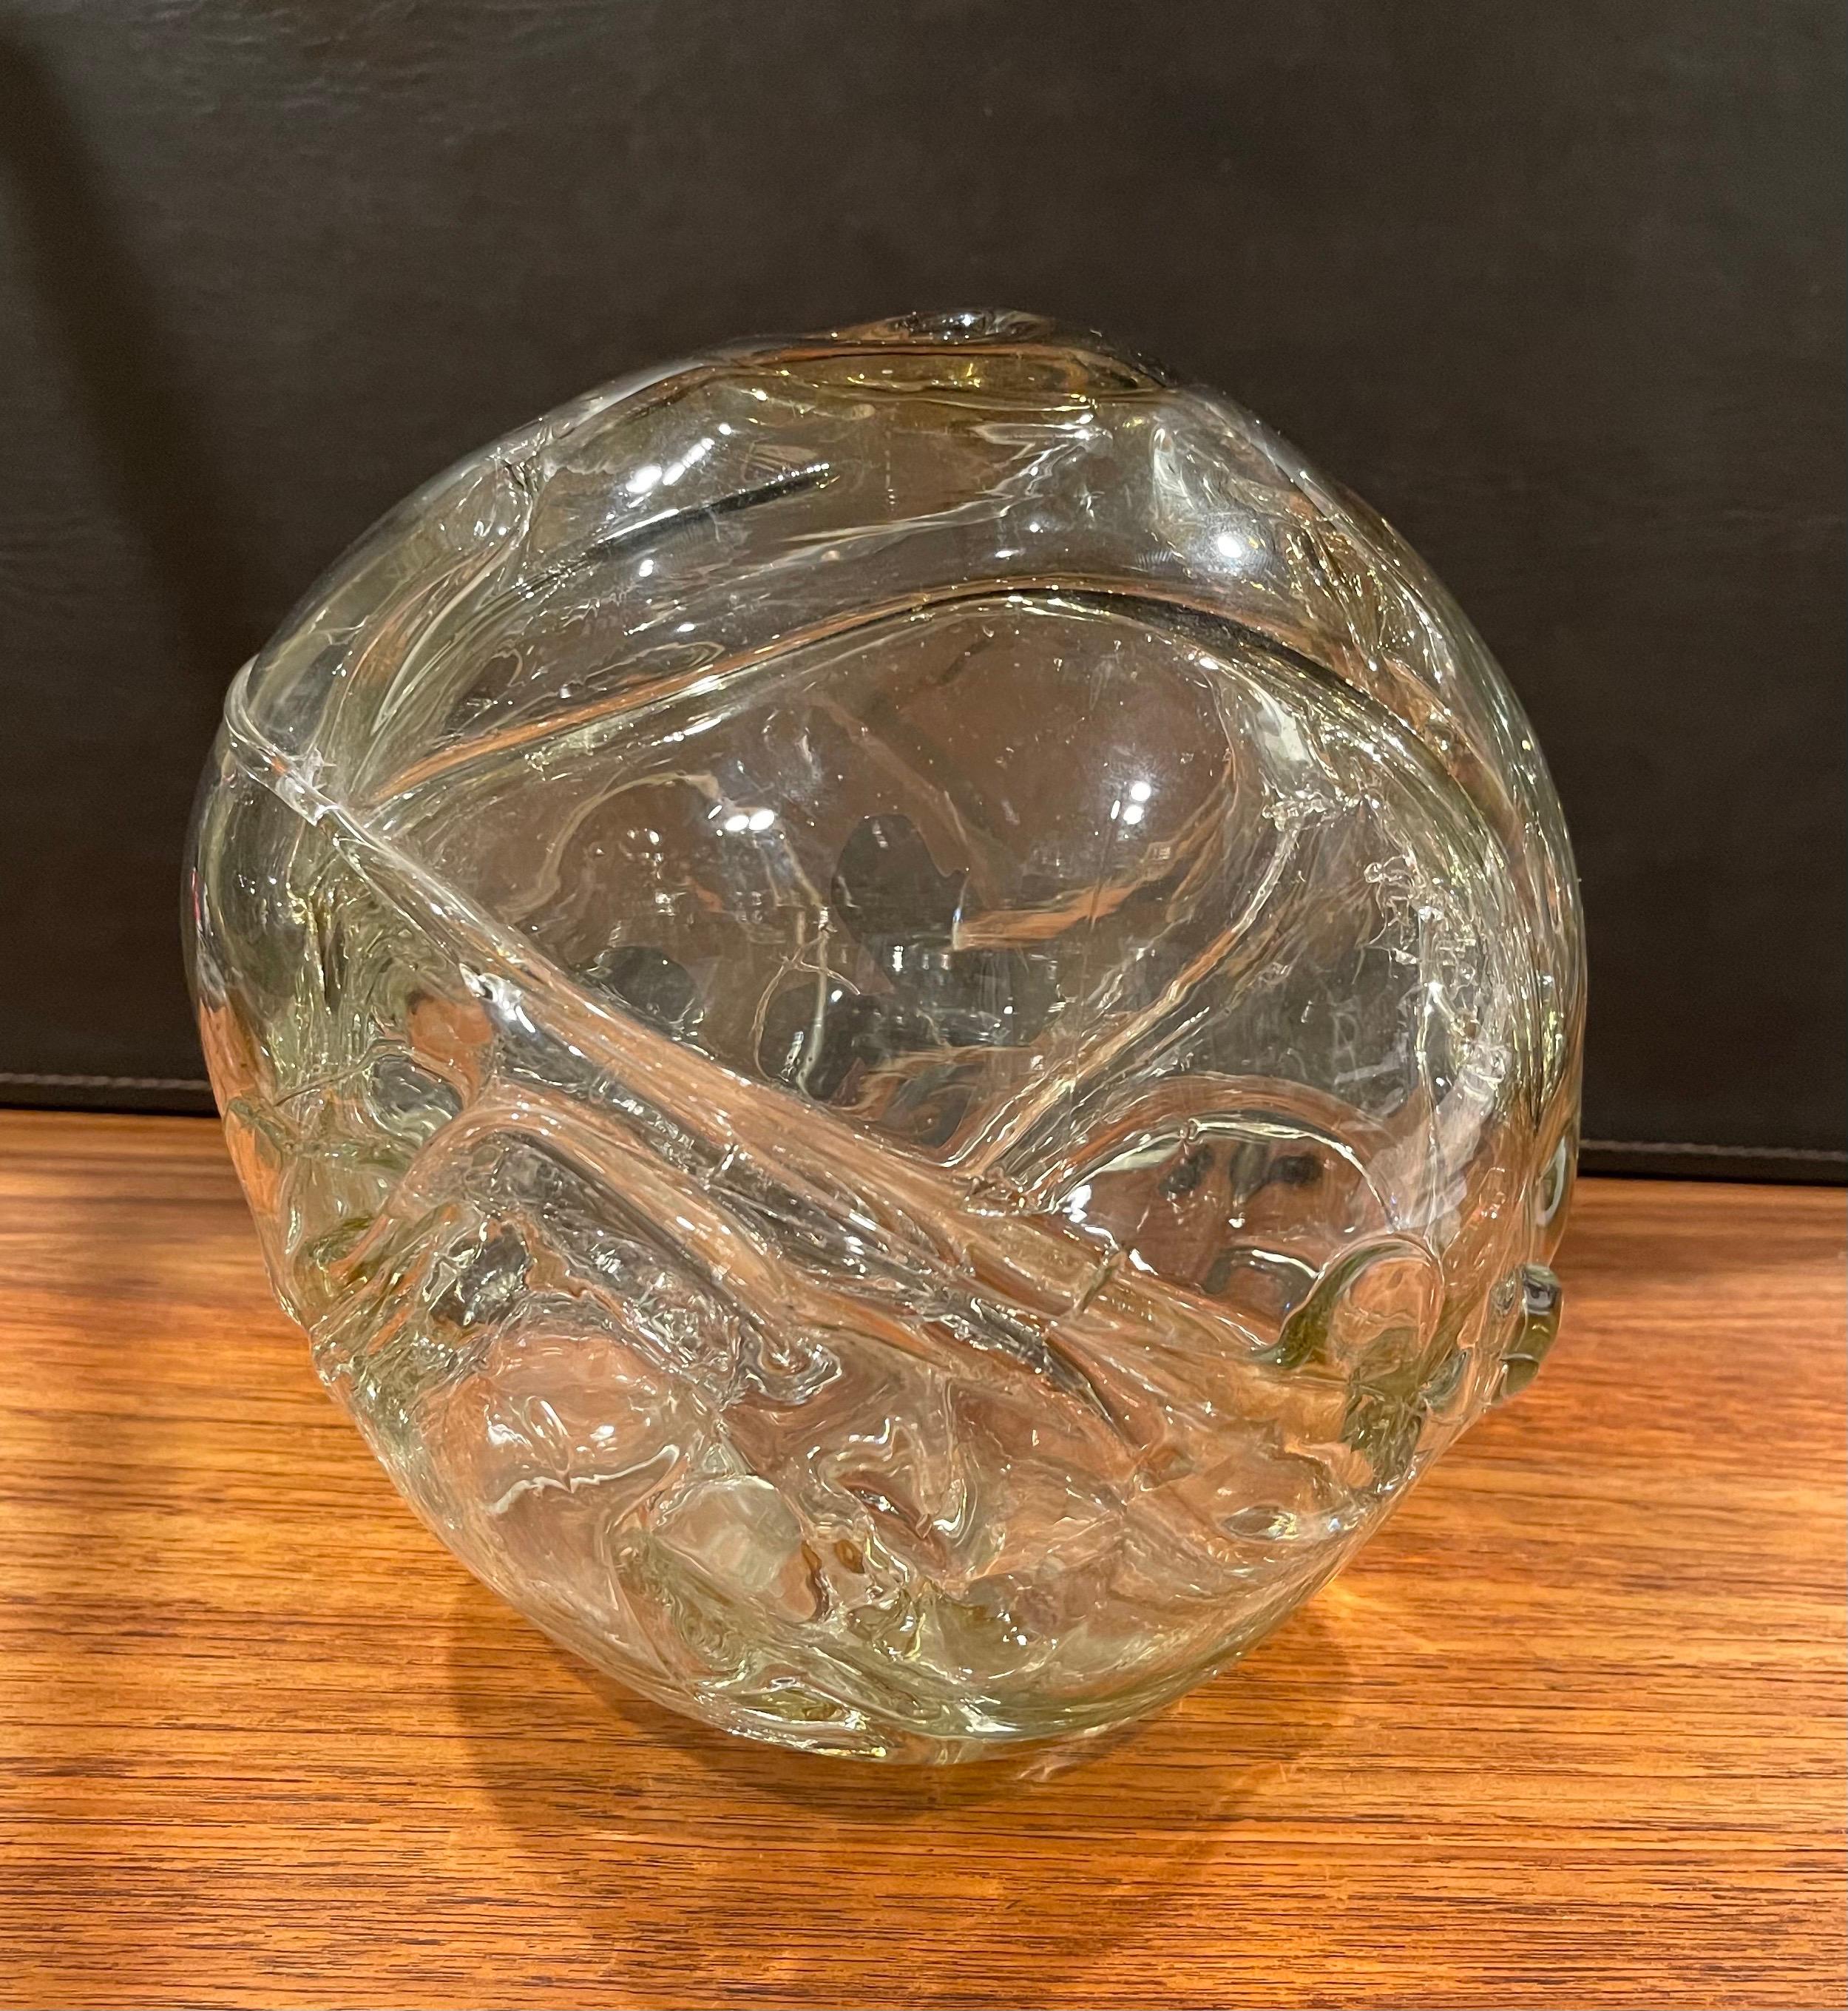 Very early large freestyle clear art glass orb vase by Peter Bramhall, circa 1972. This hand blown glass orb sculpture has a biomorphic free form design and is in very good condition with no chips or cracks. The piece is approximately 8.5